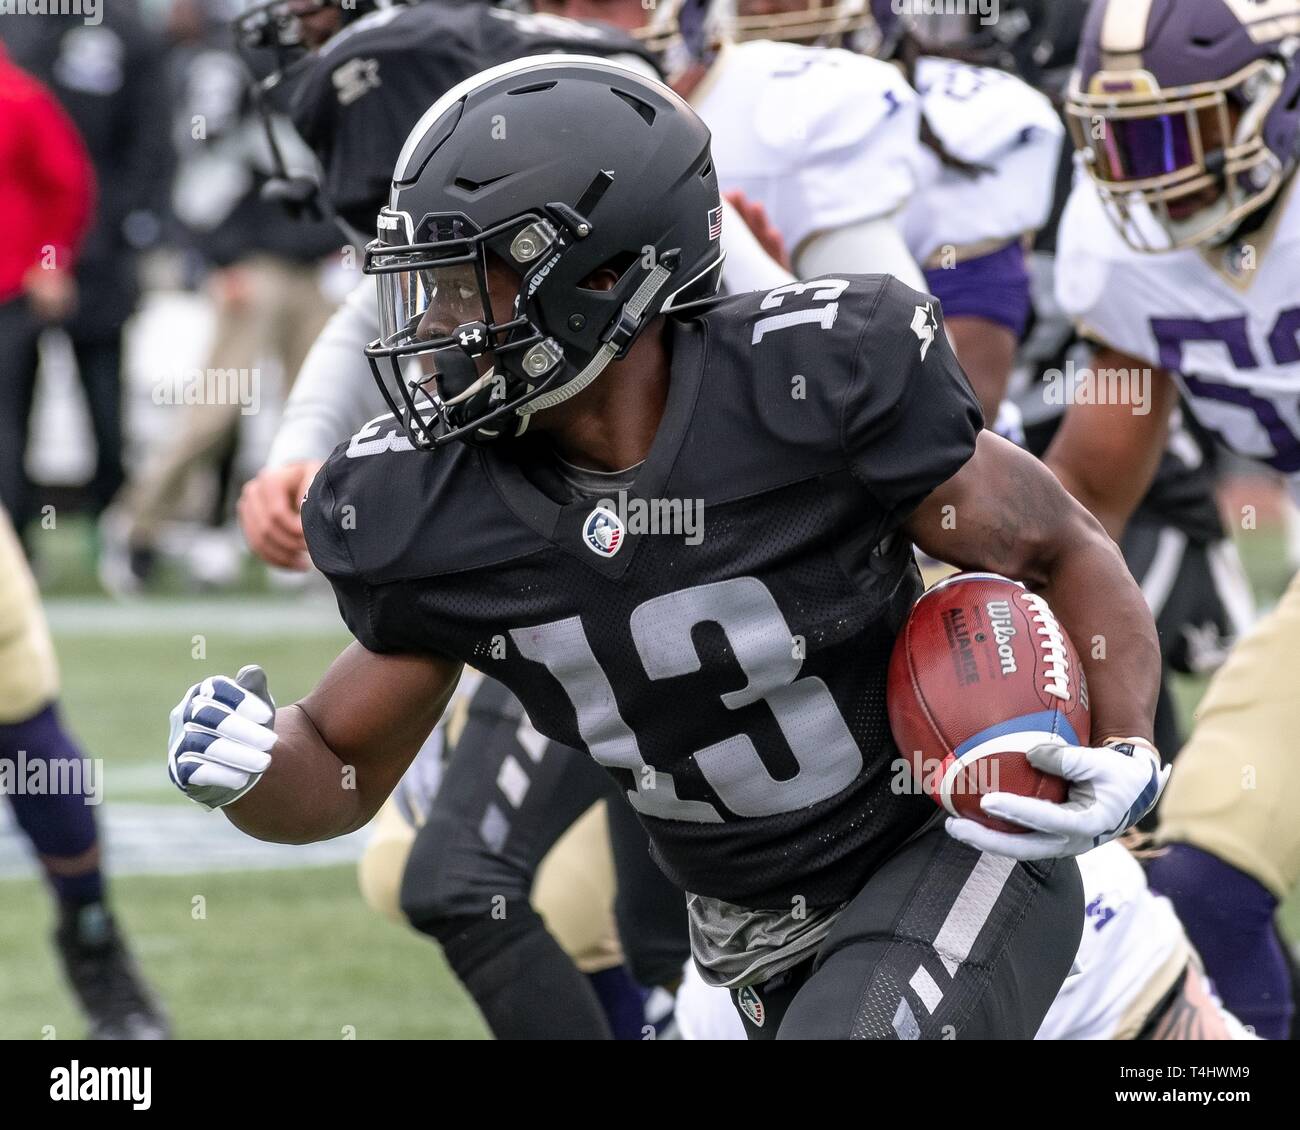 Birmingham, Alabama, USA. 31st Mar, 2019. The Birmingham Iron and the Atlanta Legends faced off in what was ultimately the last game for the two teams as the league dissolved just two days later. The Iron's home field is Legion Field, where the University of Alabama at Birmingham (UAB) plays. WR DEVOZEA FELTON (13) returns punt during the game. Credit: Jeremy Raines/ZUMA Wire/Alamy Live News Stock Photo